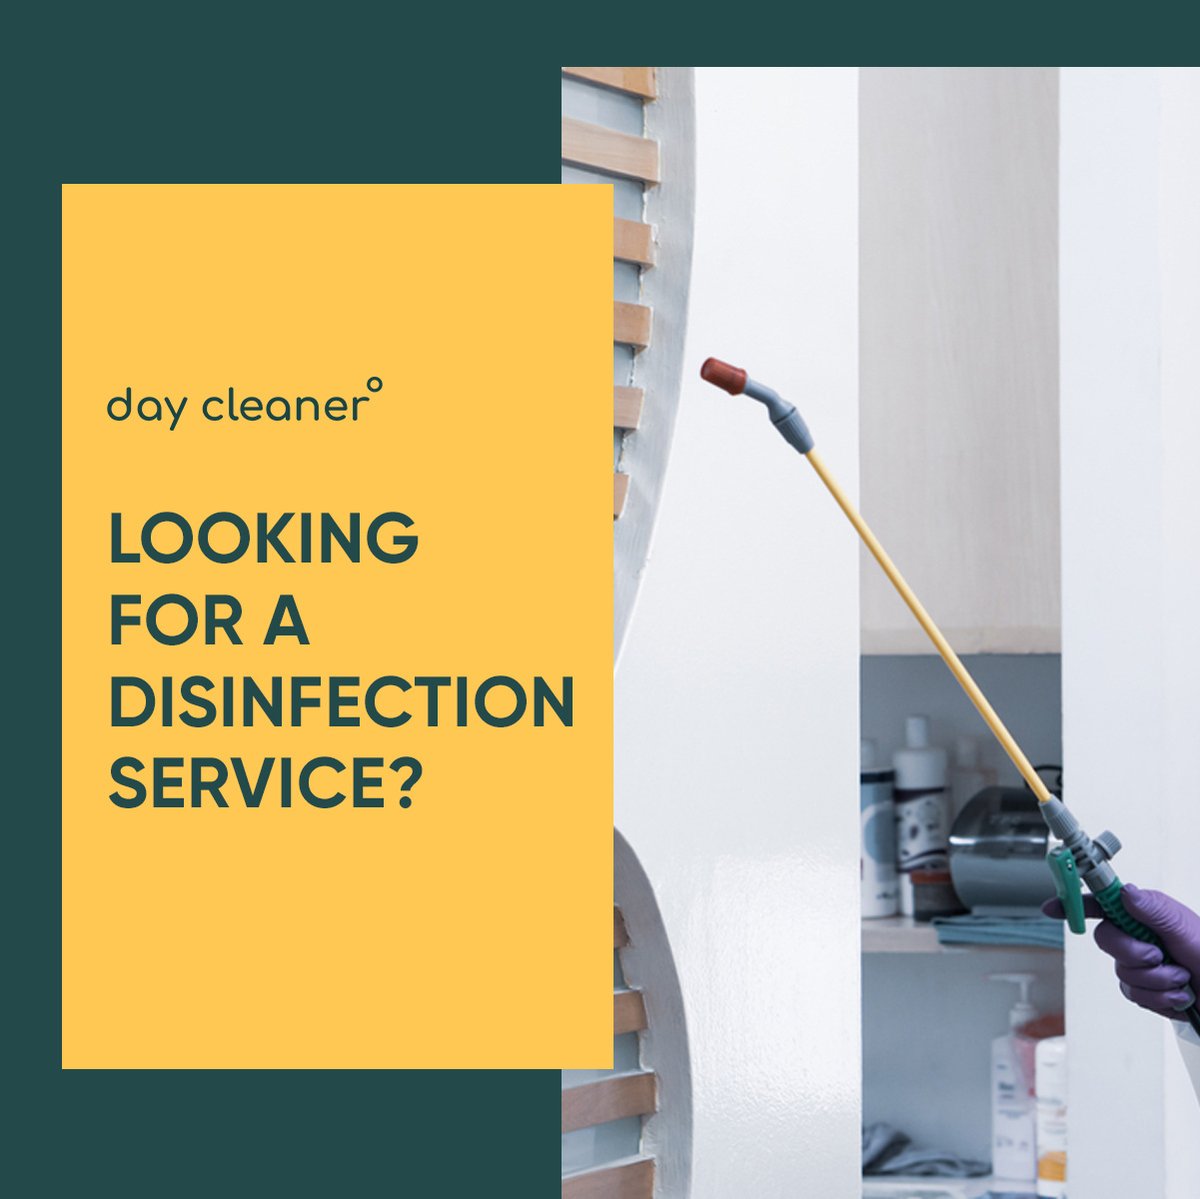 The outbreak of COVID-19 helped us realize the benefits of disinfecting homes. Book your slot for the overall well being of your family.

daycleaner.com

#cleanhome #dubai #dubaicleaners #dubaicleaning #deepcleaningdubai #generalcleaningdubai  #daycleaner